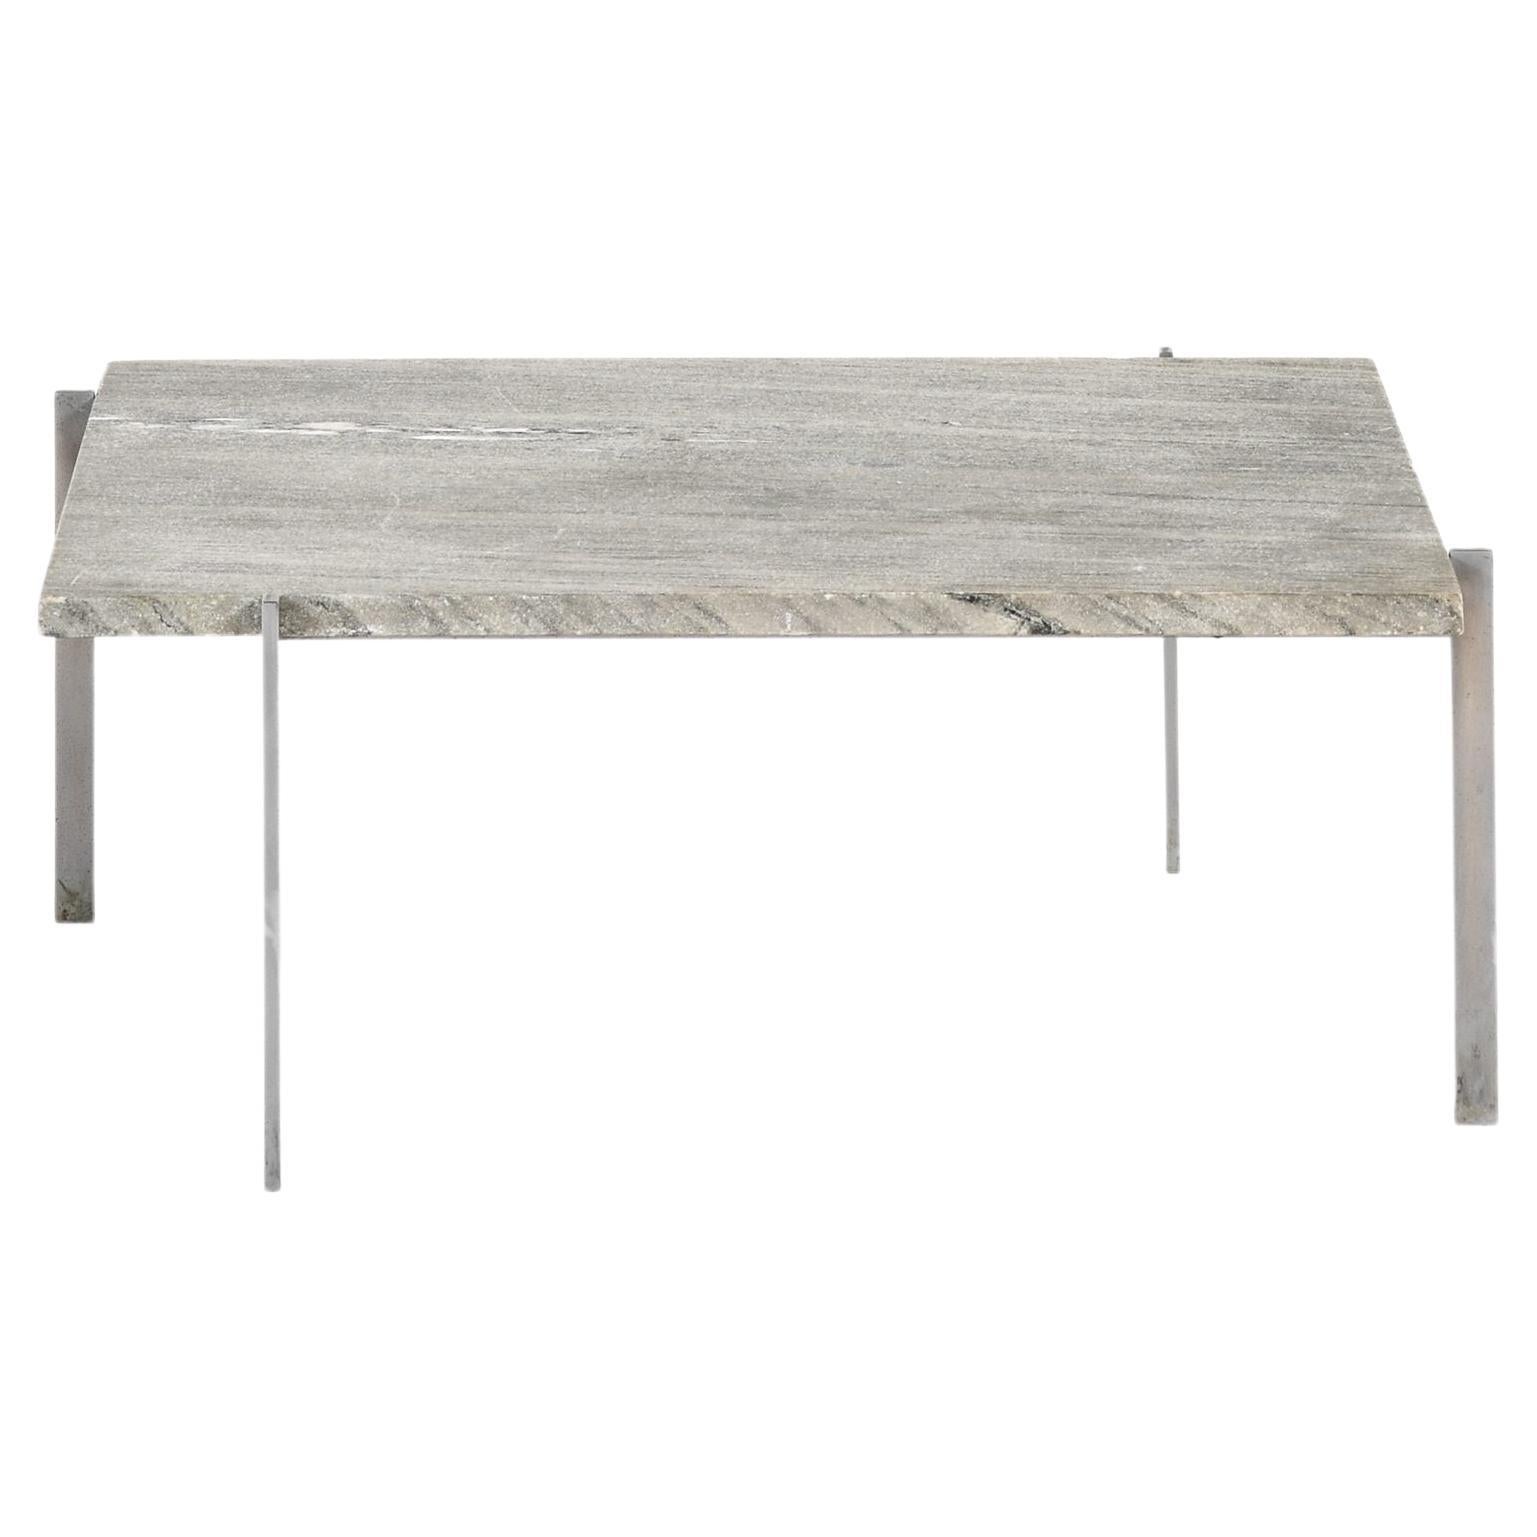 Coffee Table in Steel with Cipollini Marble Top by Poul Kjærholm, 1950s For Sale